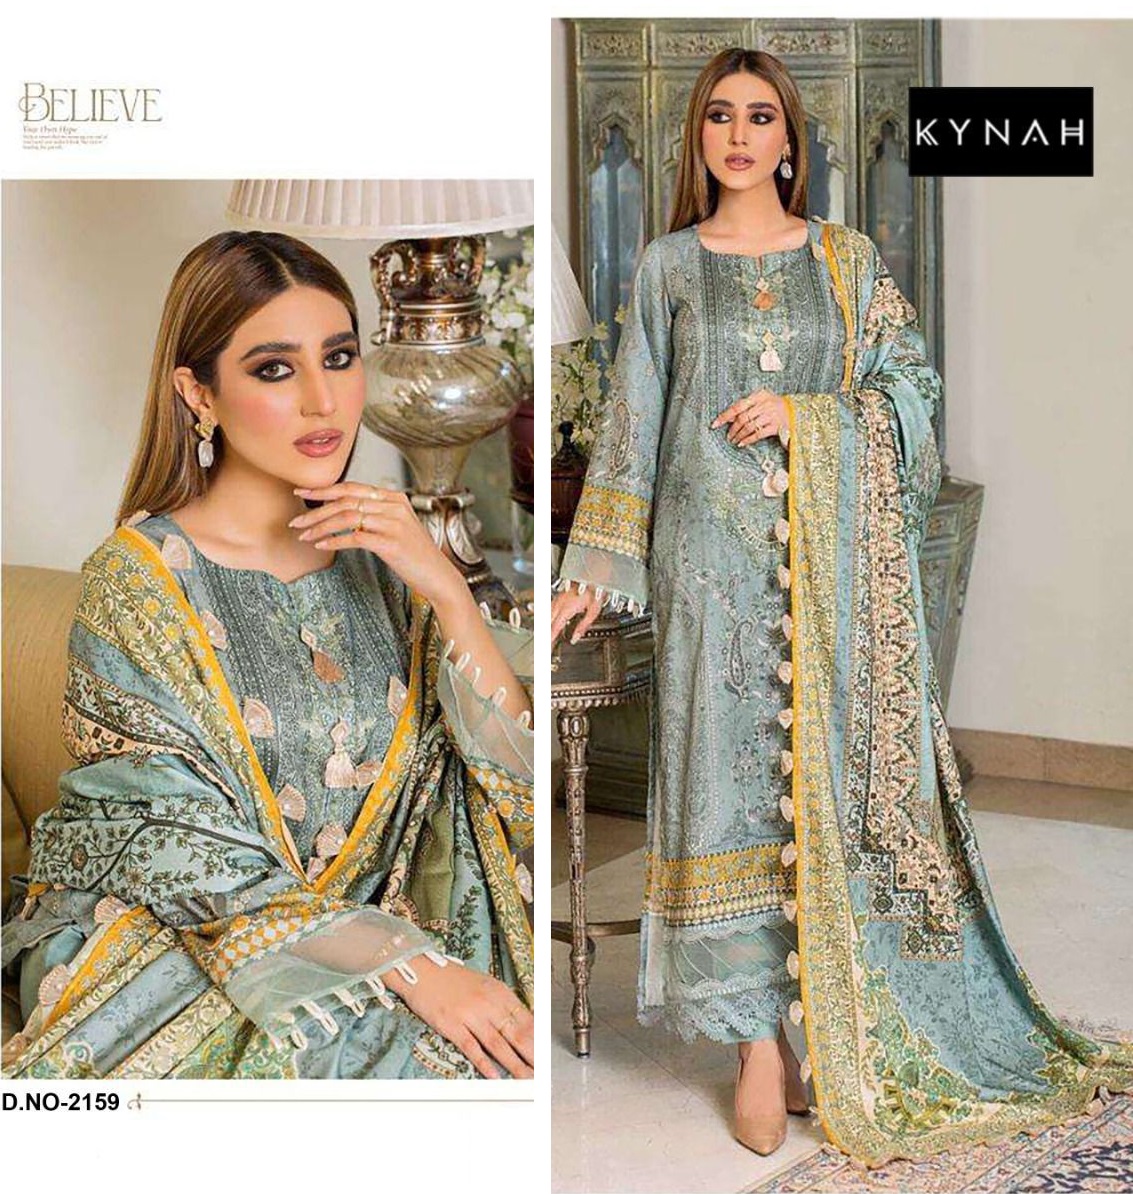 KYNAH 2159 COTTON PAKISTANI SUITS IN INDIA